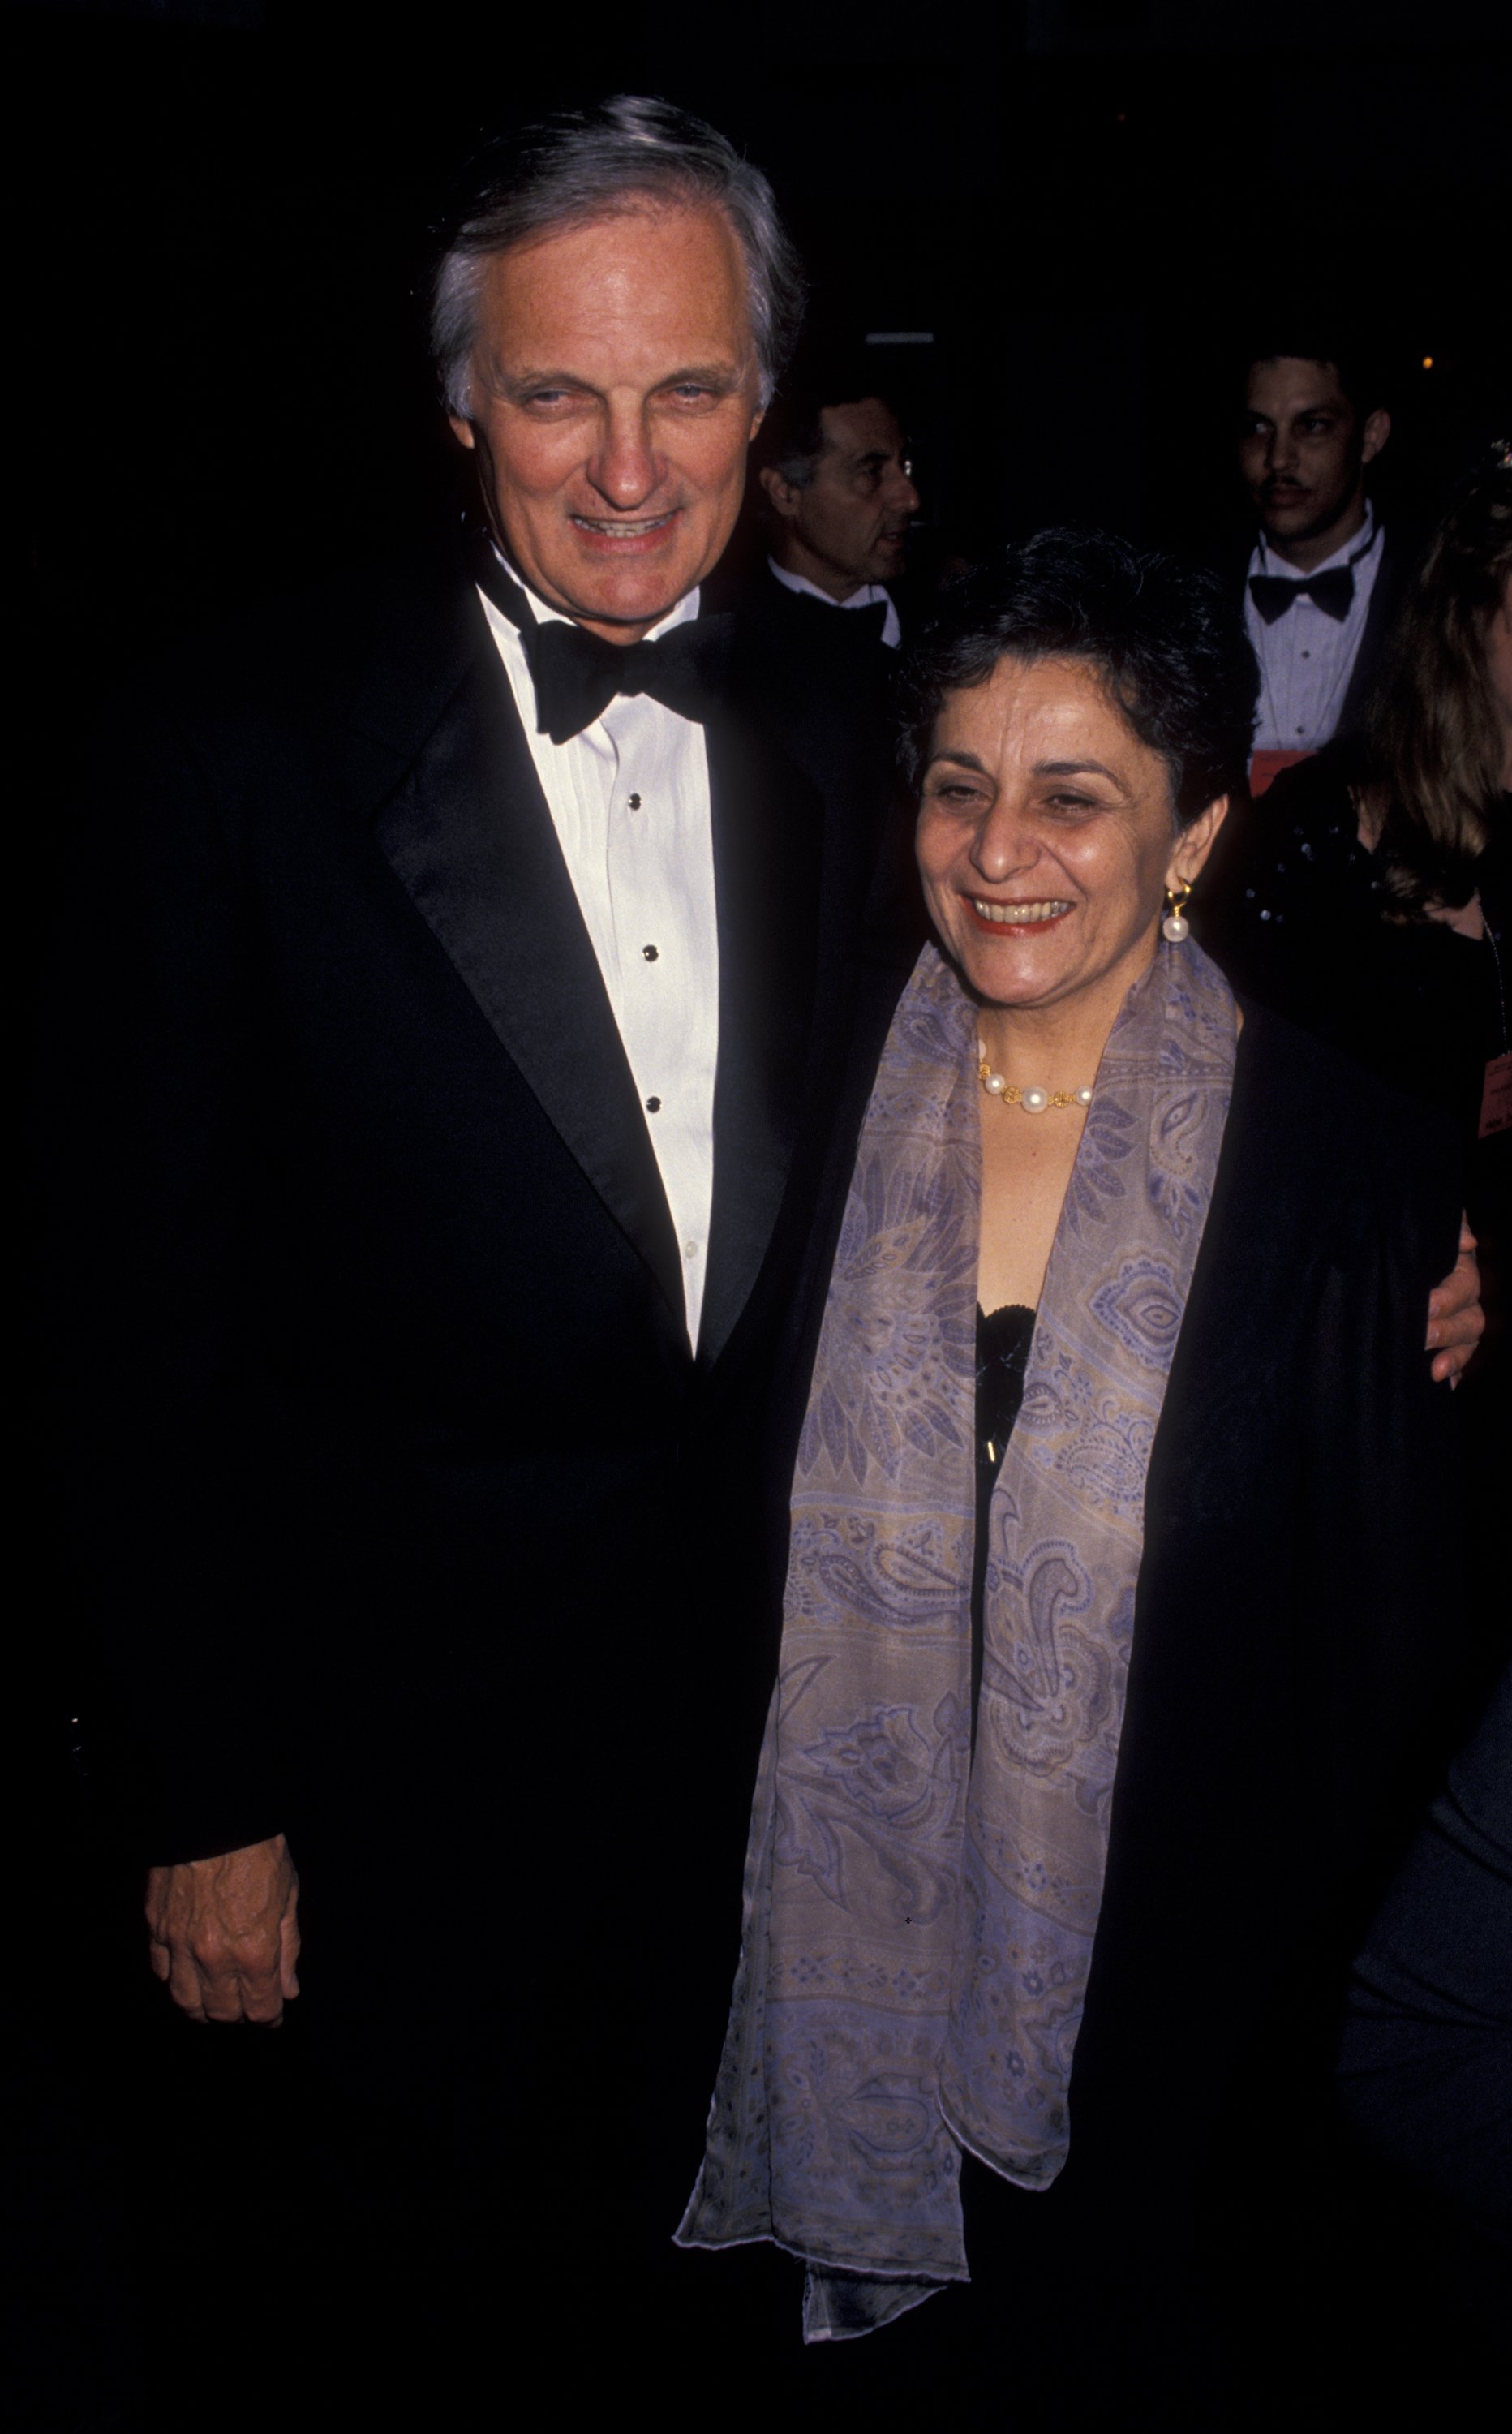 Alan Alda and Arlene Weiss attending the 48th Annual Tony Awards at the Gershwin Theater on June 12, 1994 in New York City | Source: Getty Images